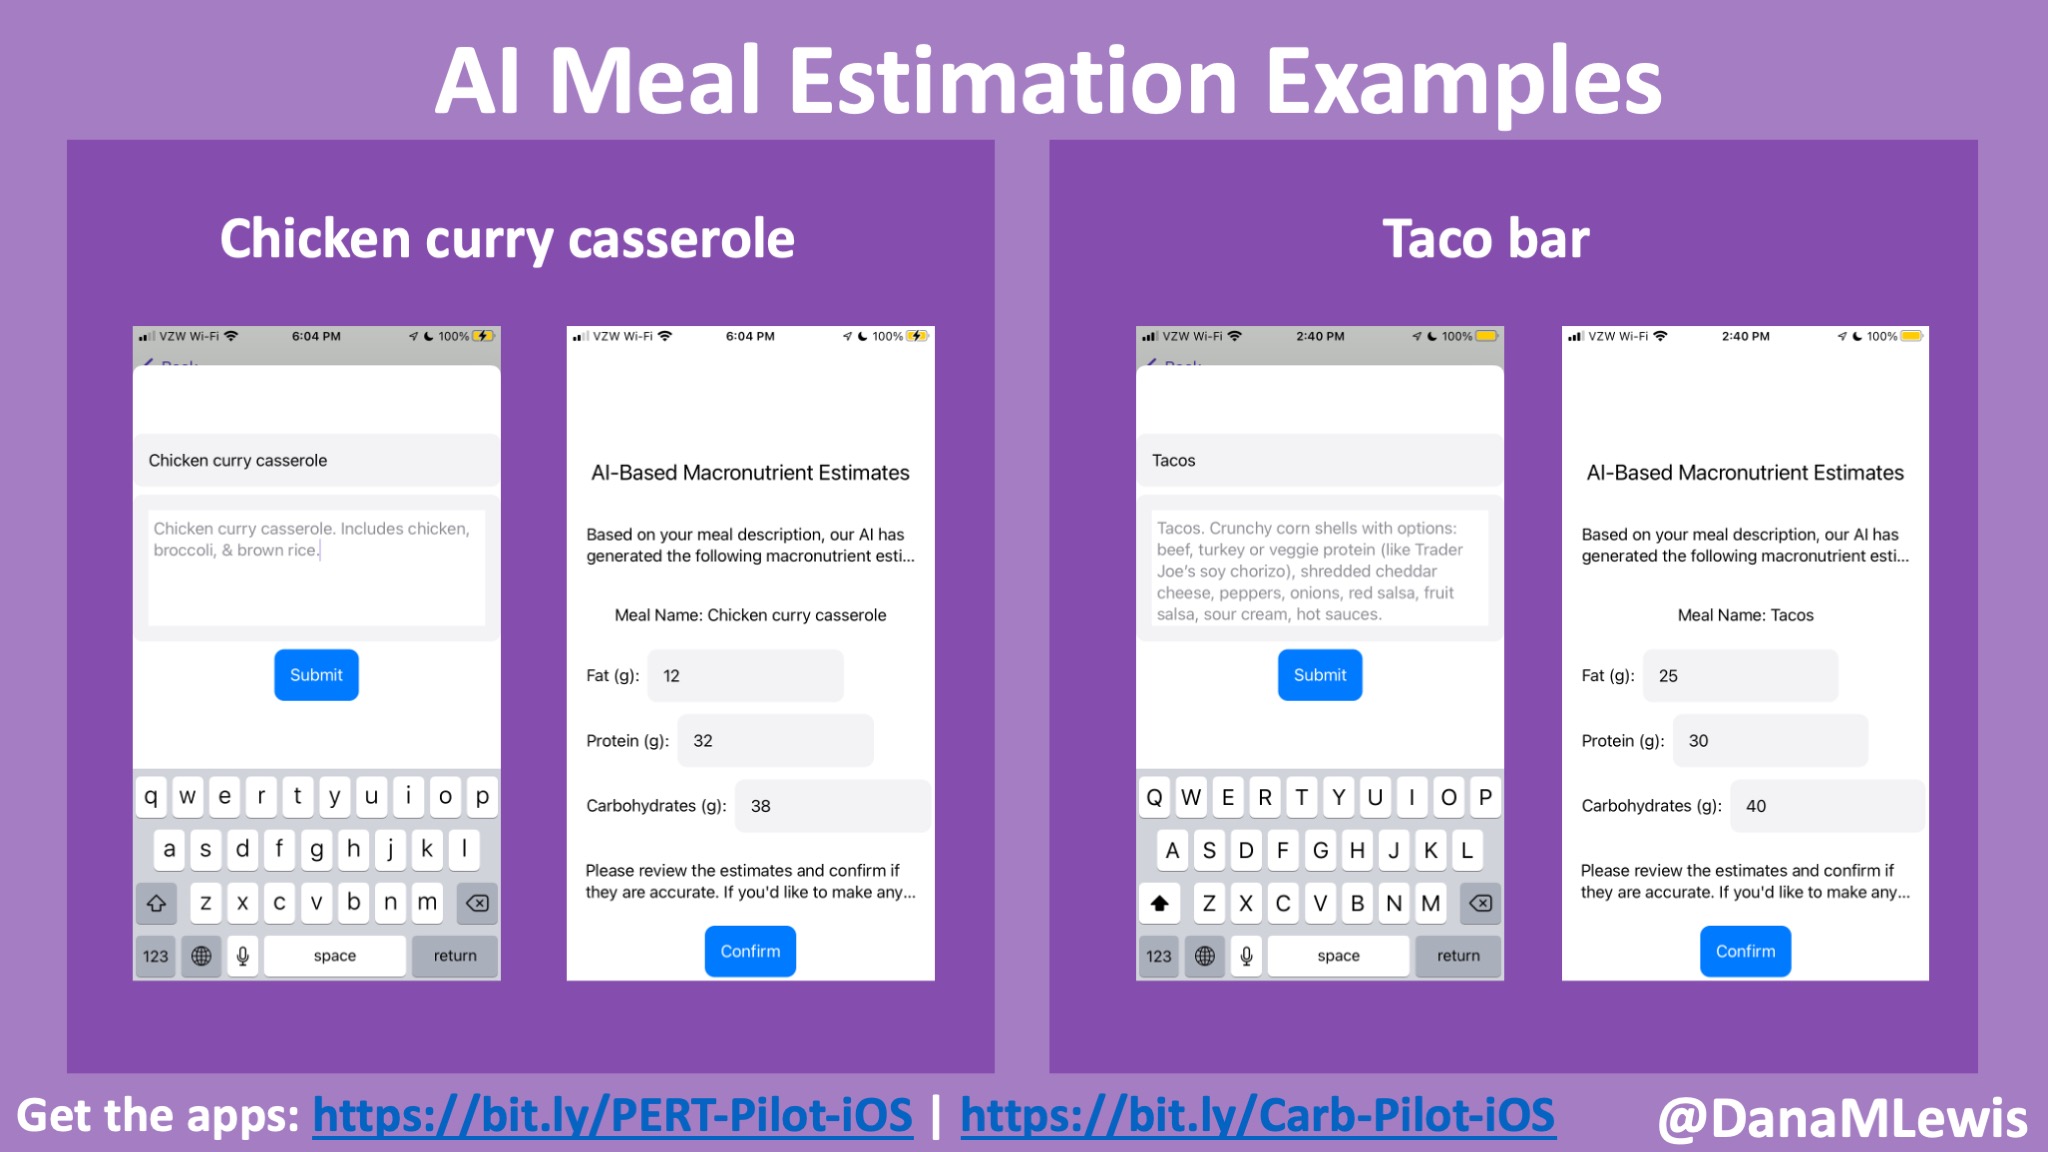 Showing even more screenshots of PERT Pilot with the meal description input and the output of the estimated macronutrient counts for grams of fat, protein, and carb